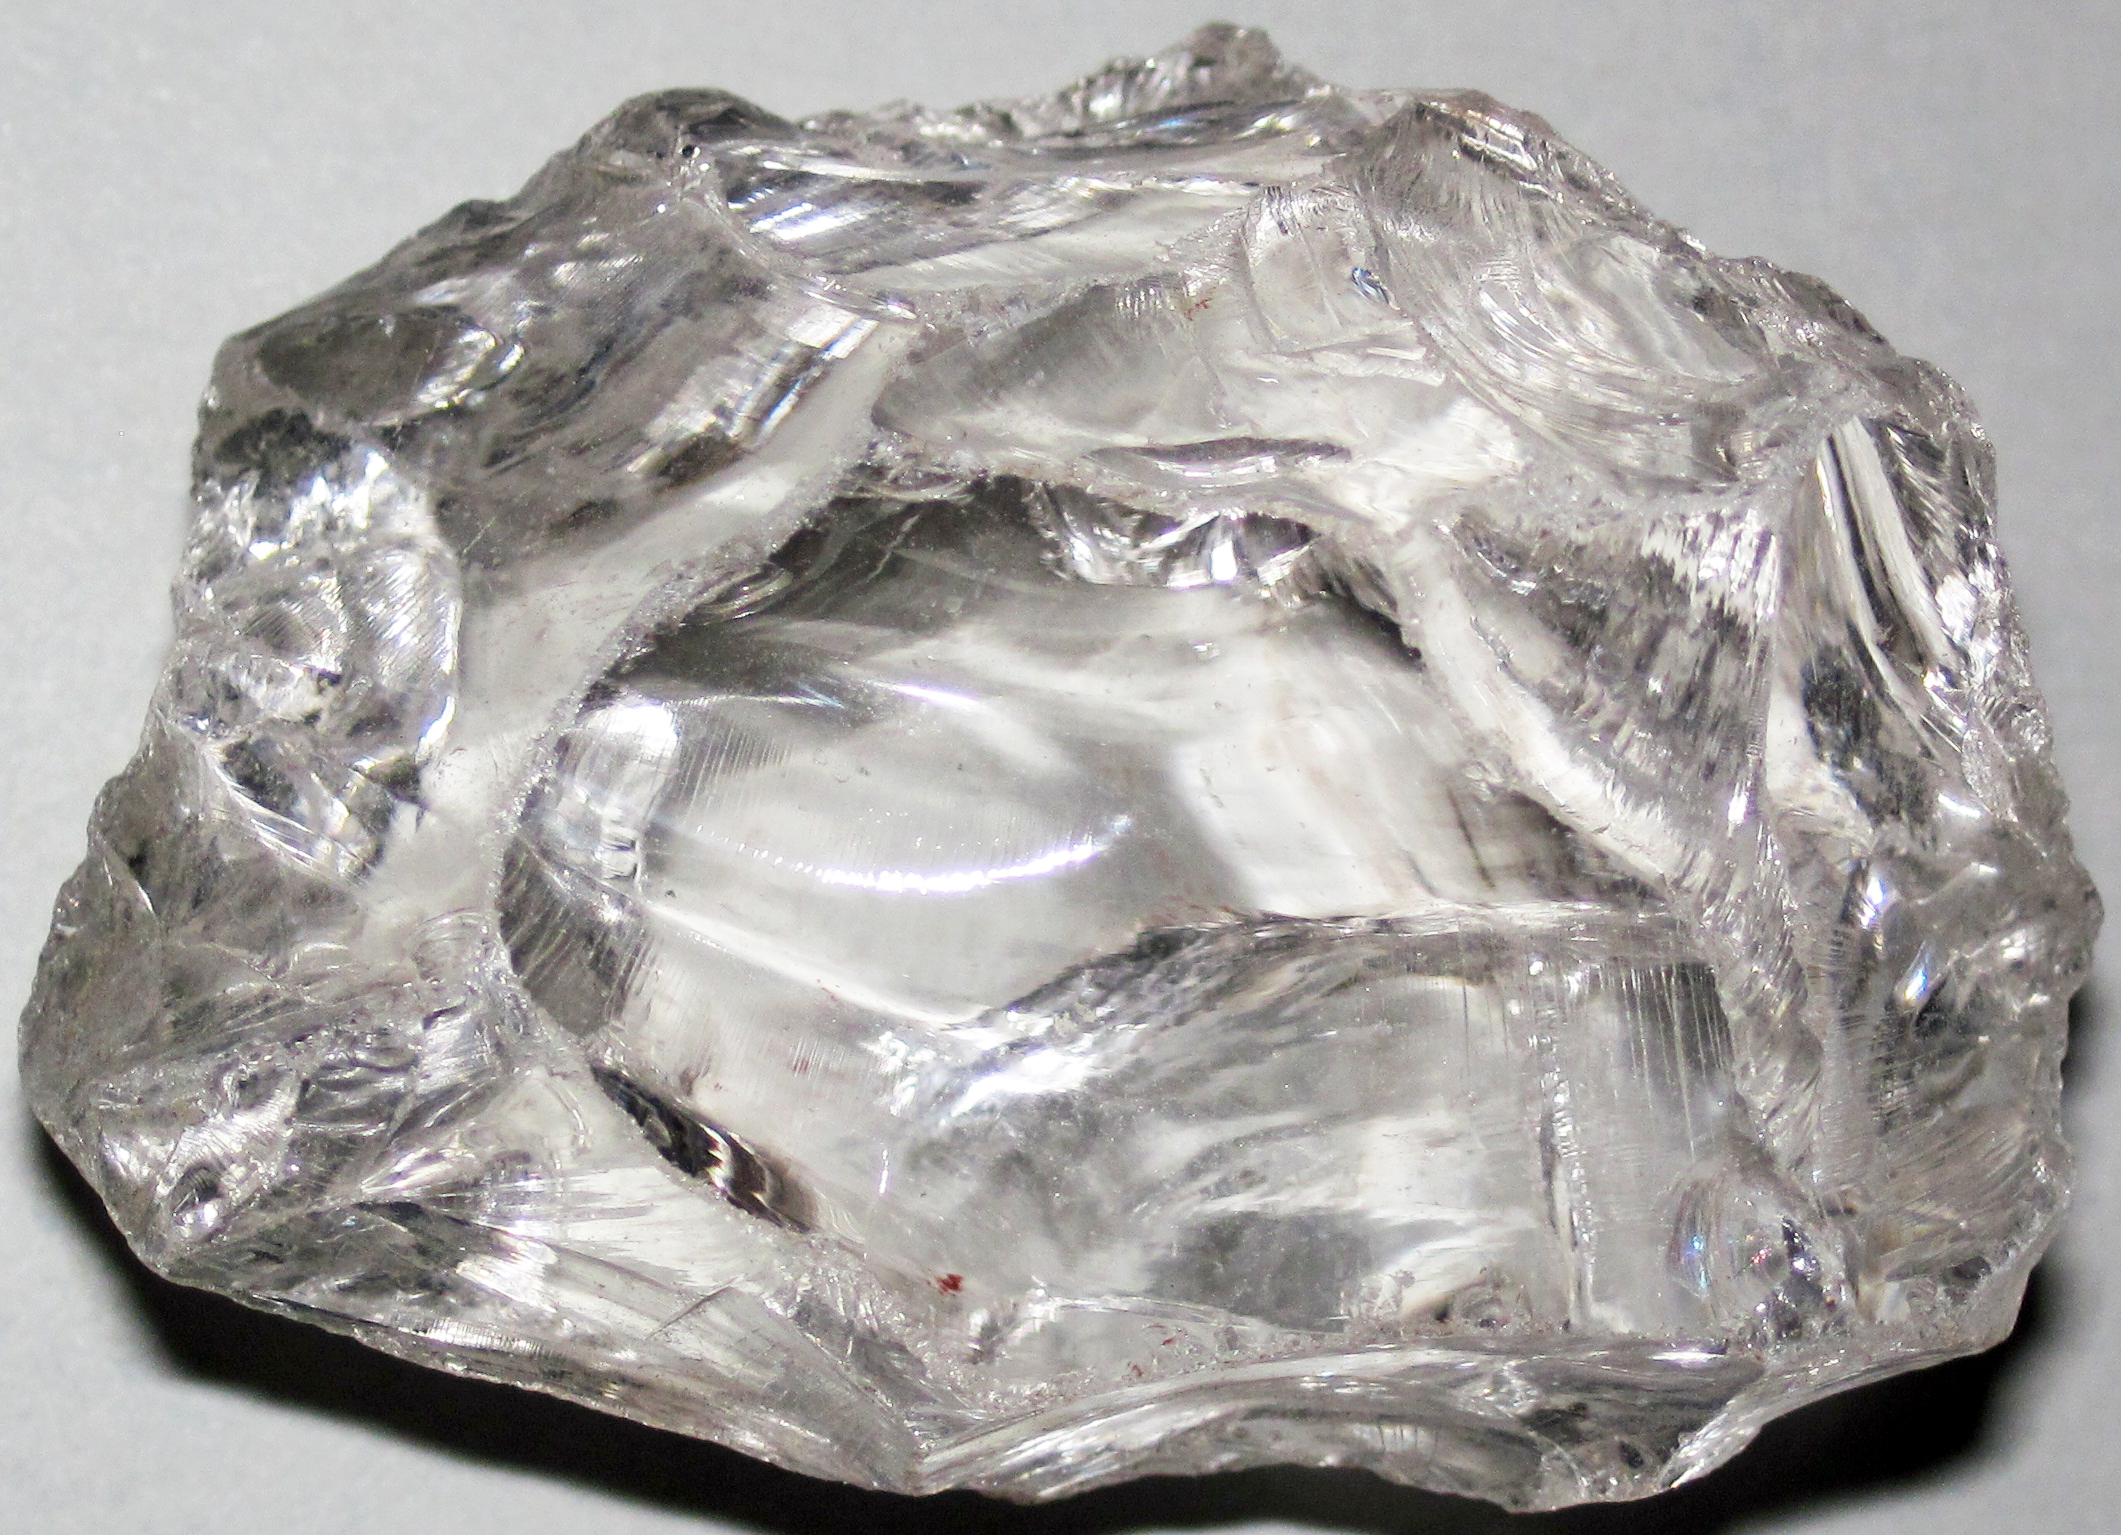 A specimen of a variety of quartz showing conchoidal fracture